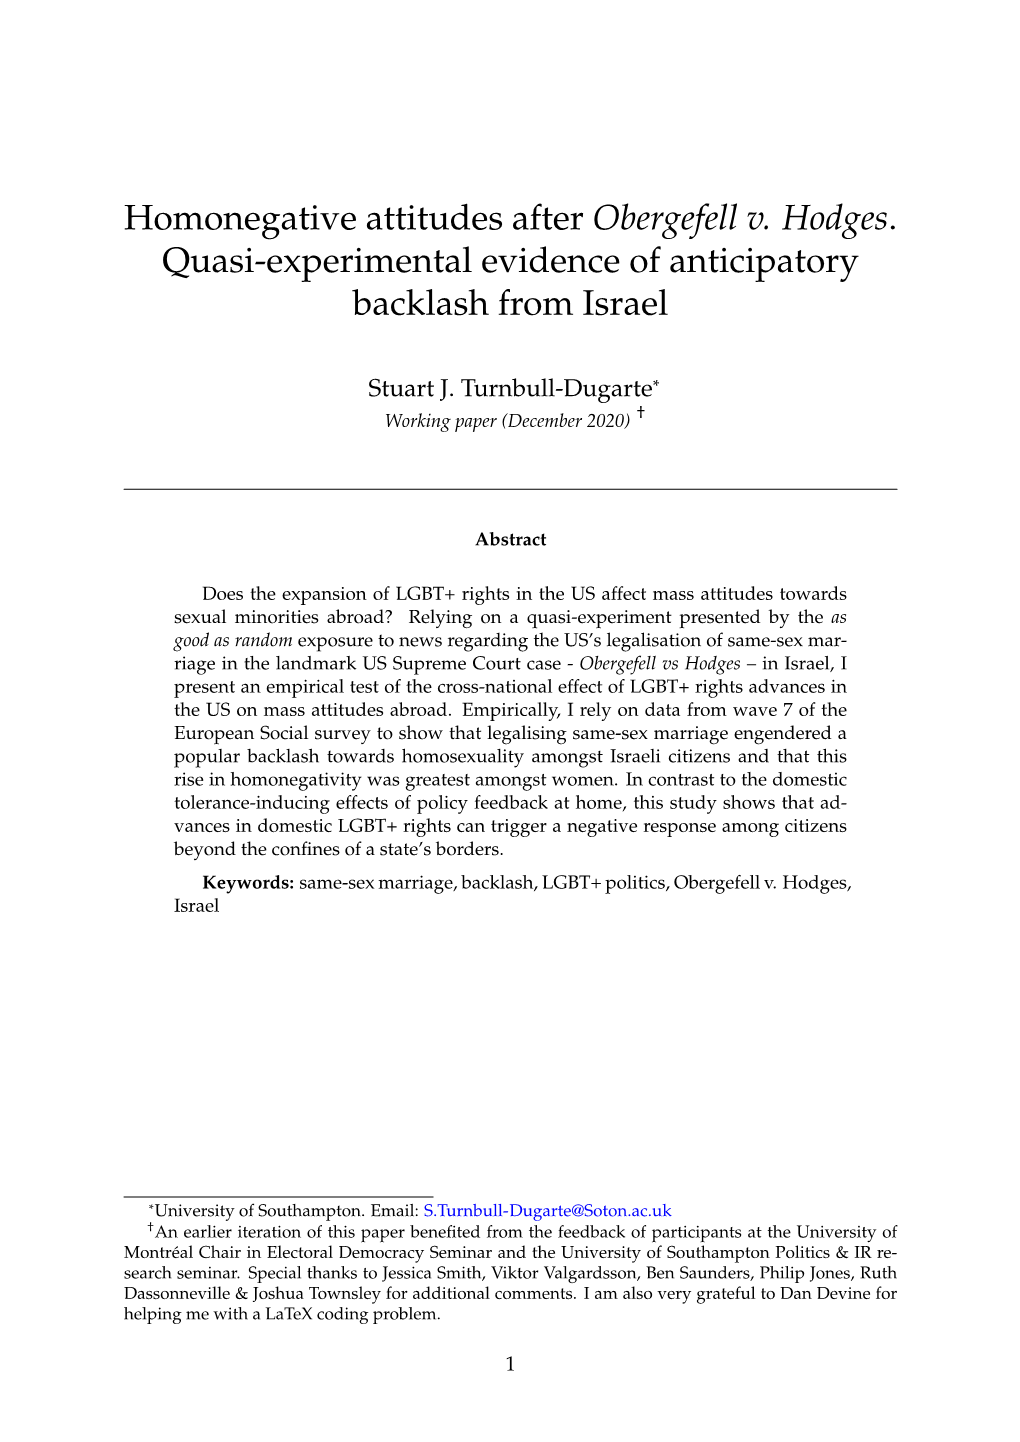 Homonegative Attitudes After Obergefell V. Hodges. Quasi-Experimental Evidence of Anticipatory Backlash from Israel